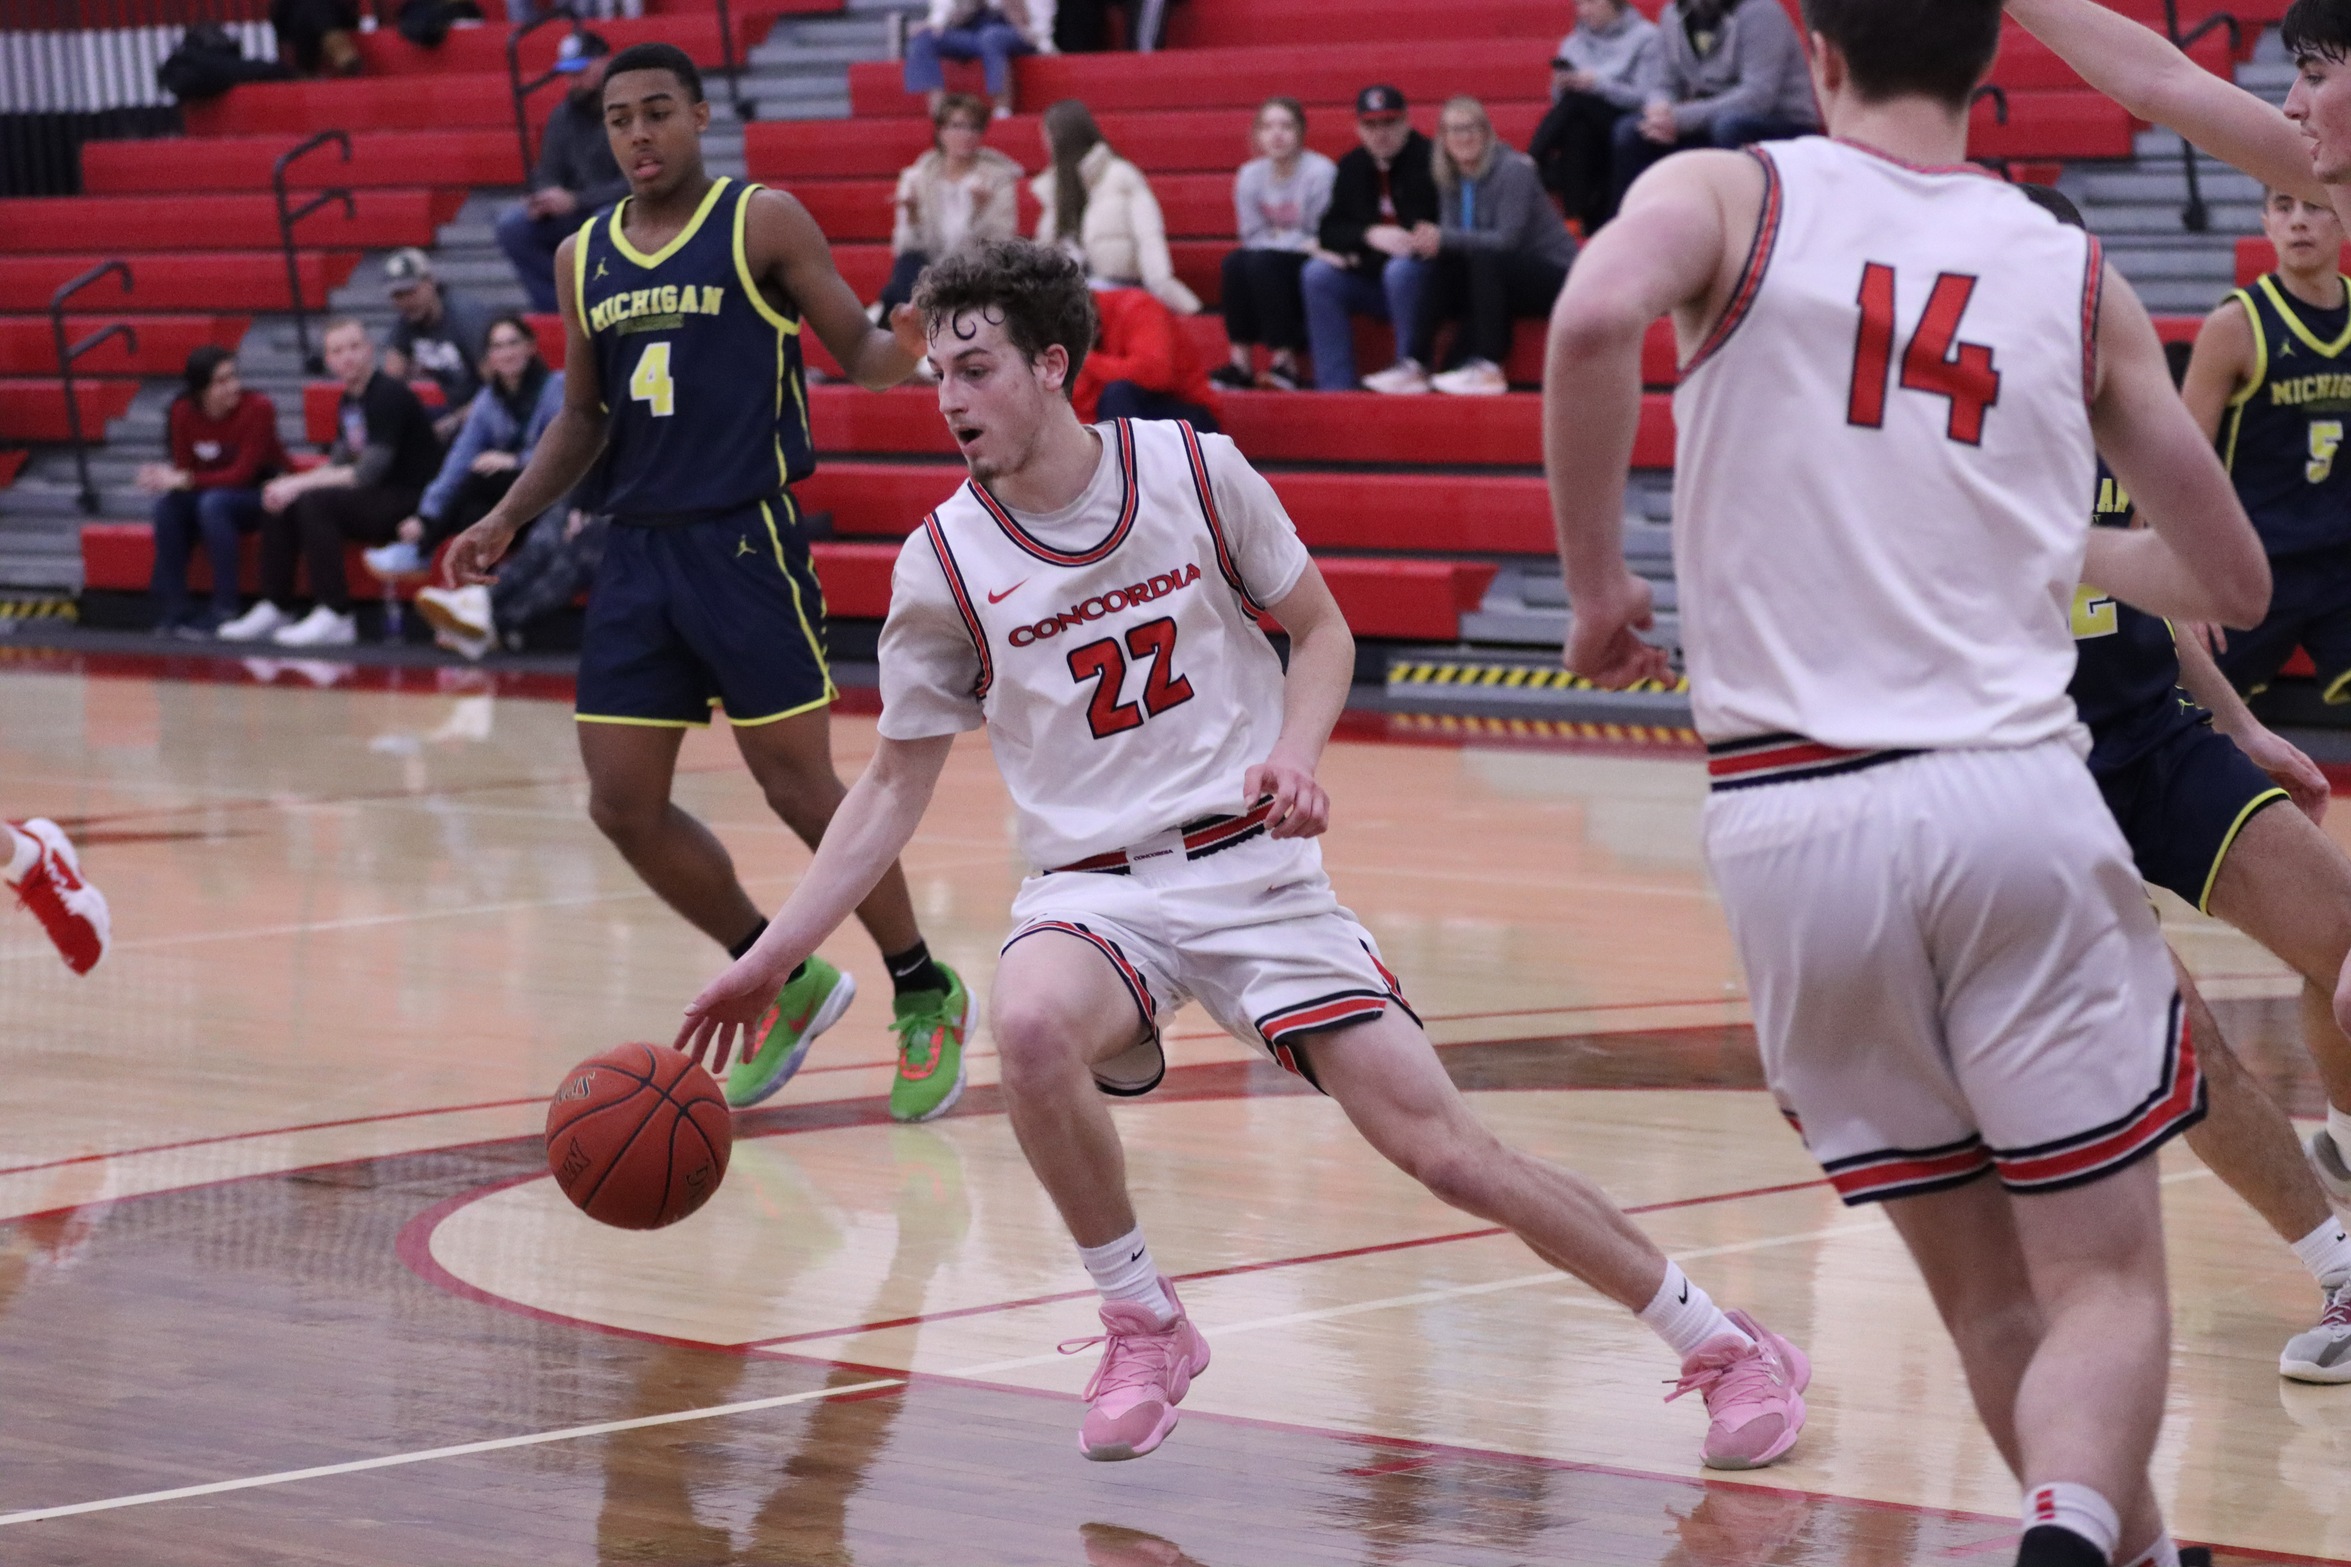 Men's Basketball cruises to 95-72 win over UM-Dearborn